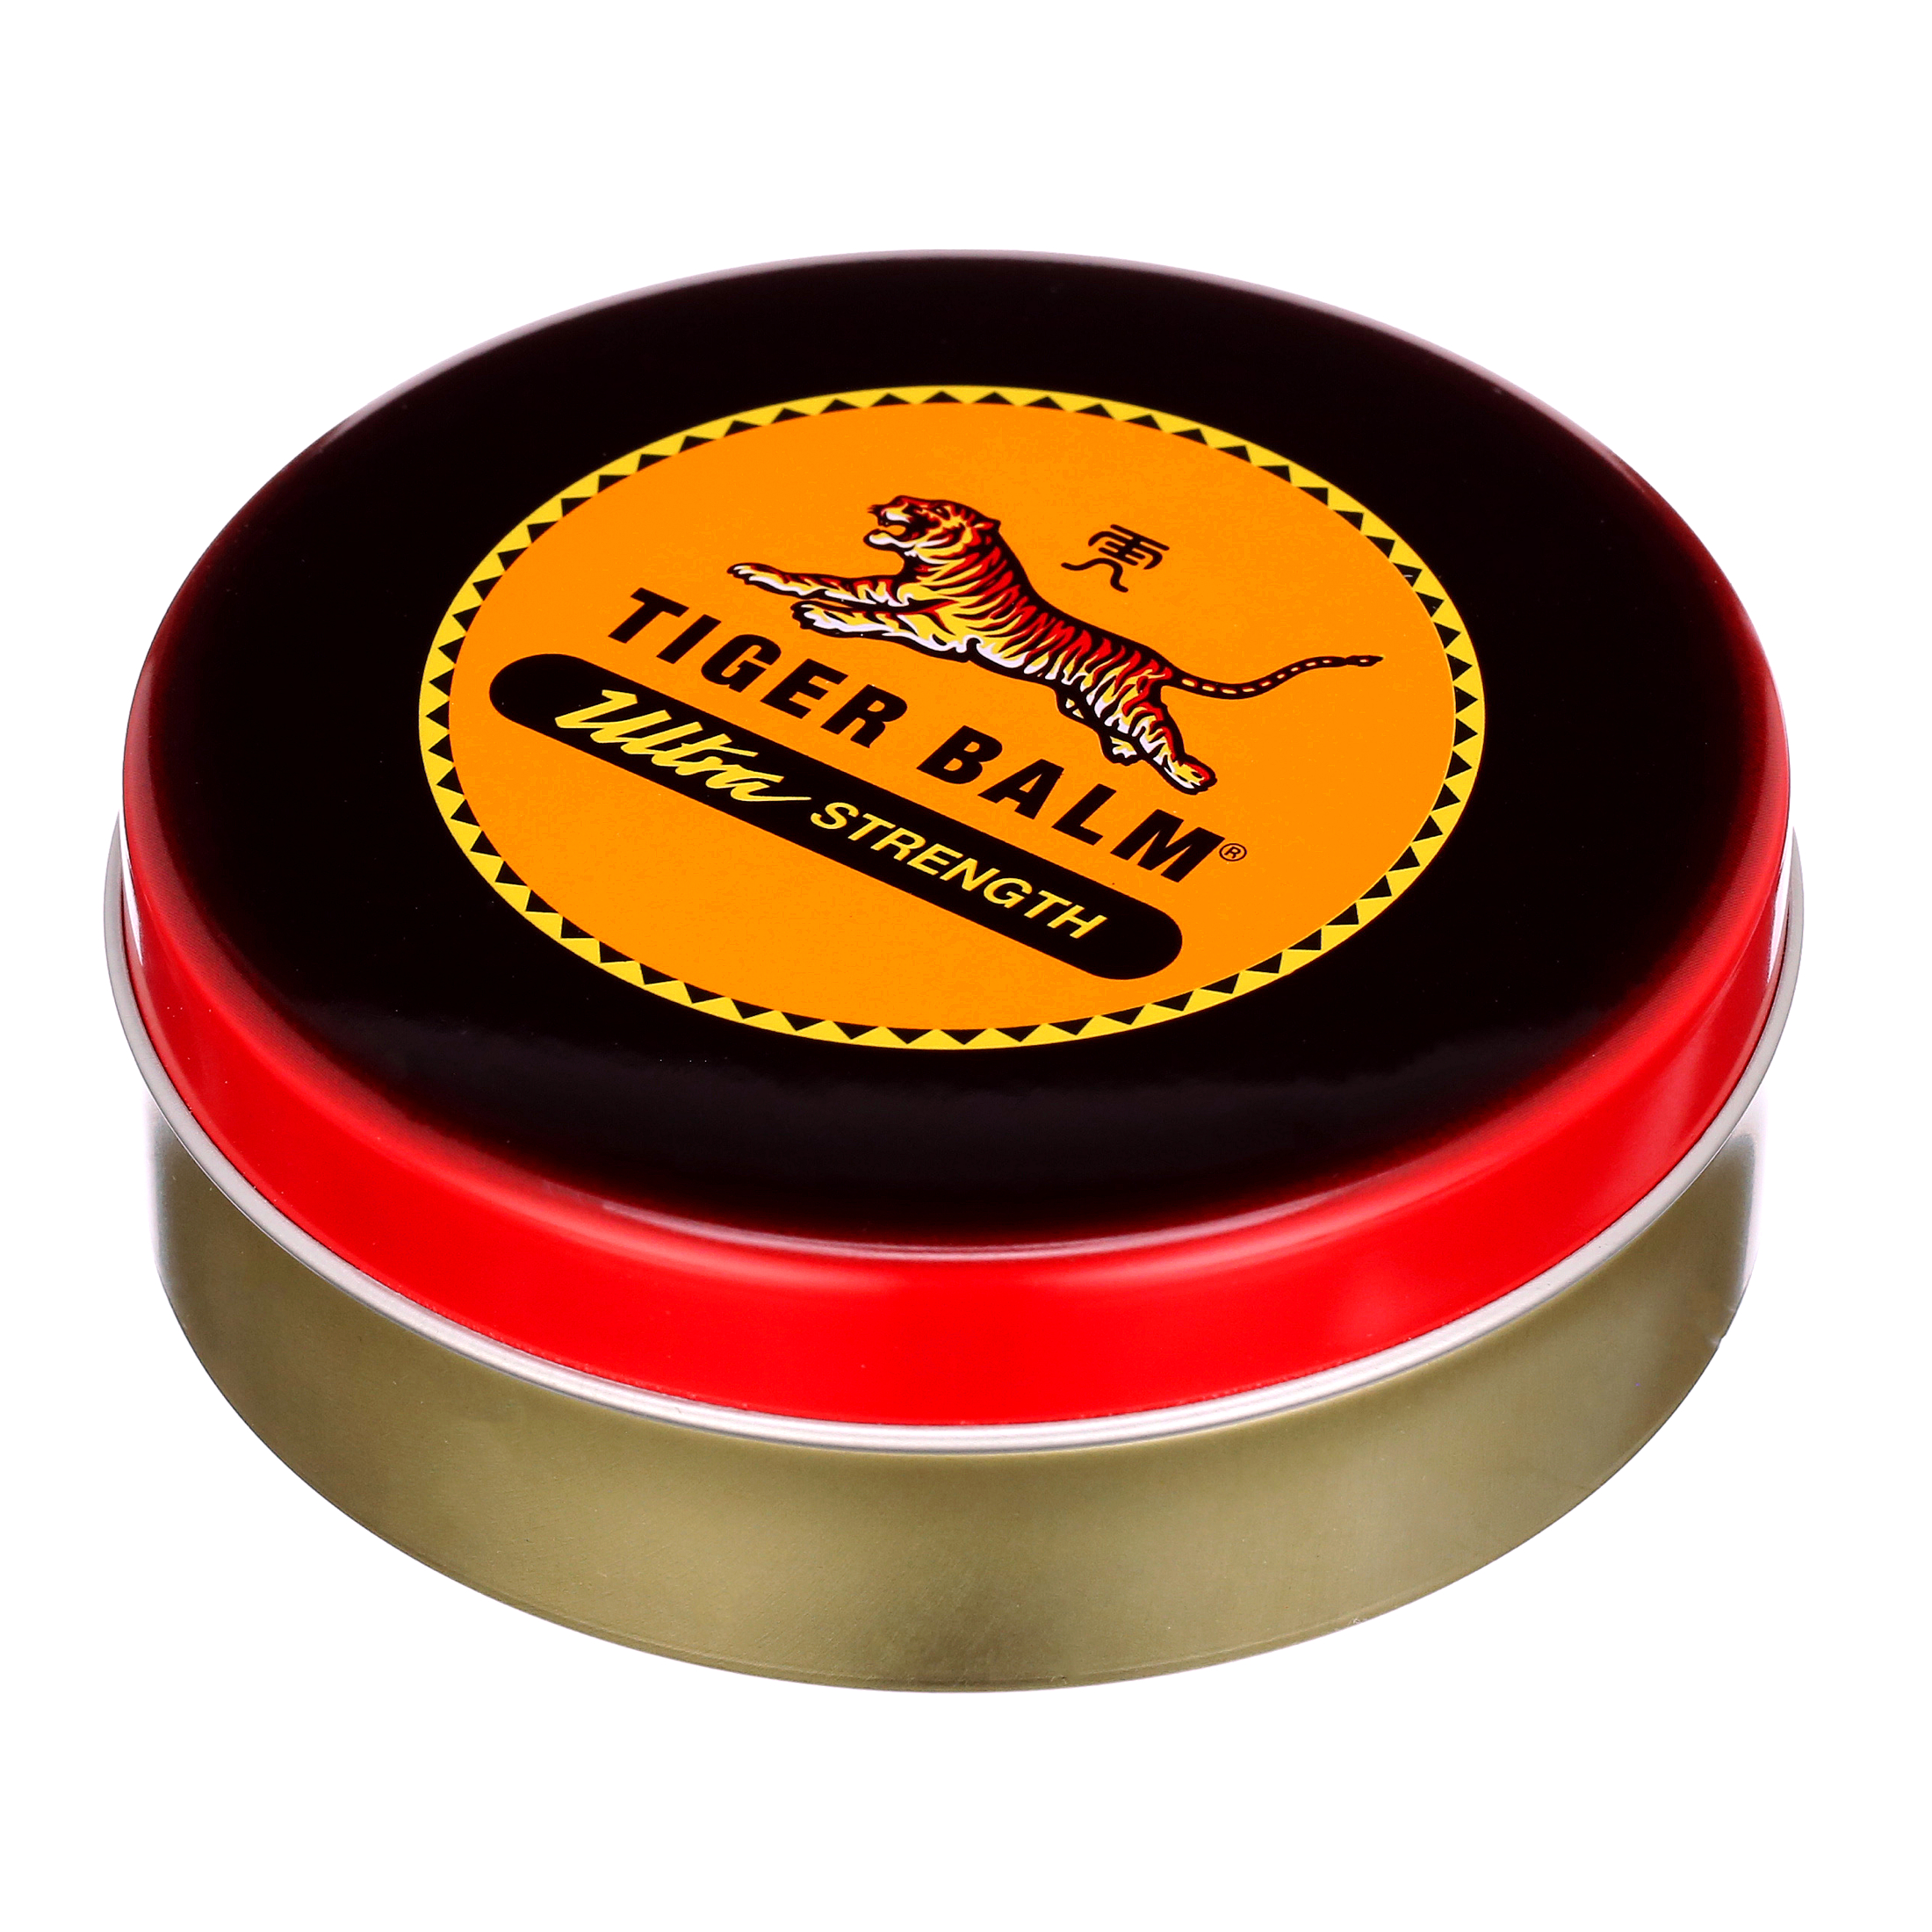 Tiger Balm Ultra Strength Pain Relieving Ointment, 1.7 oz Value Sized tin for Backaches Sore Muscles Bruises and Sprains - image 3 of 7